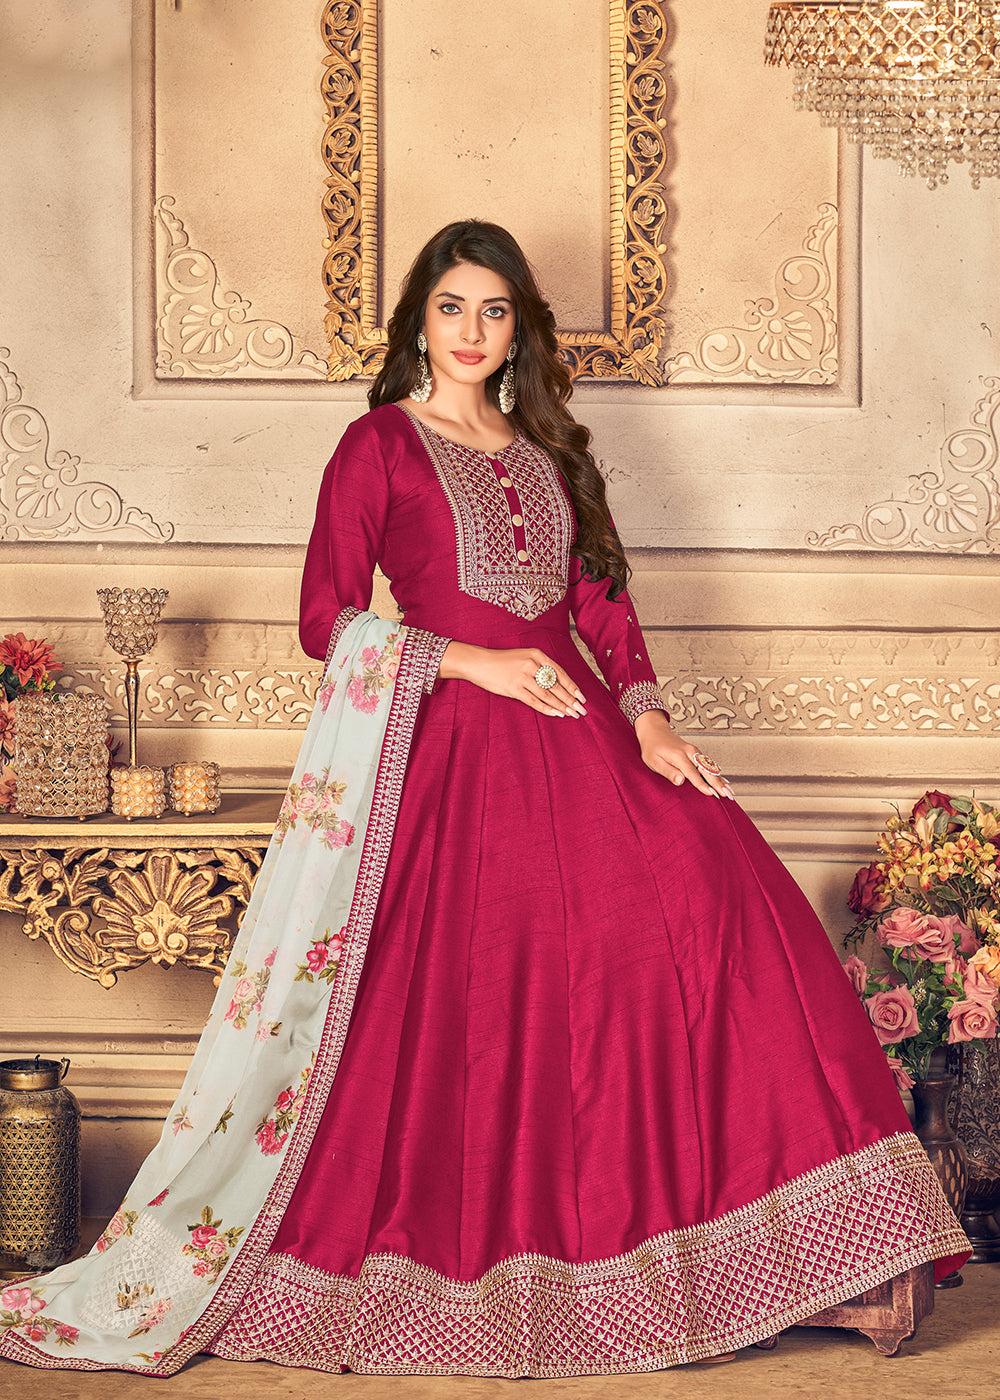 Buy Now Hot Pink Silk Beautifully Embroidered Floor Length Anarkali Suit Online in Canada at Empress Clothing. 